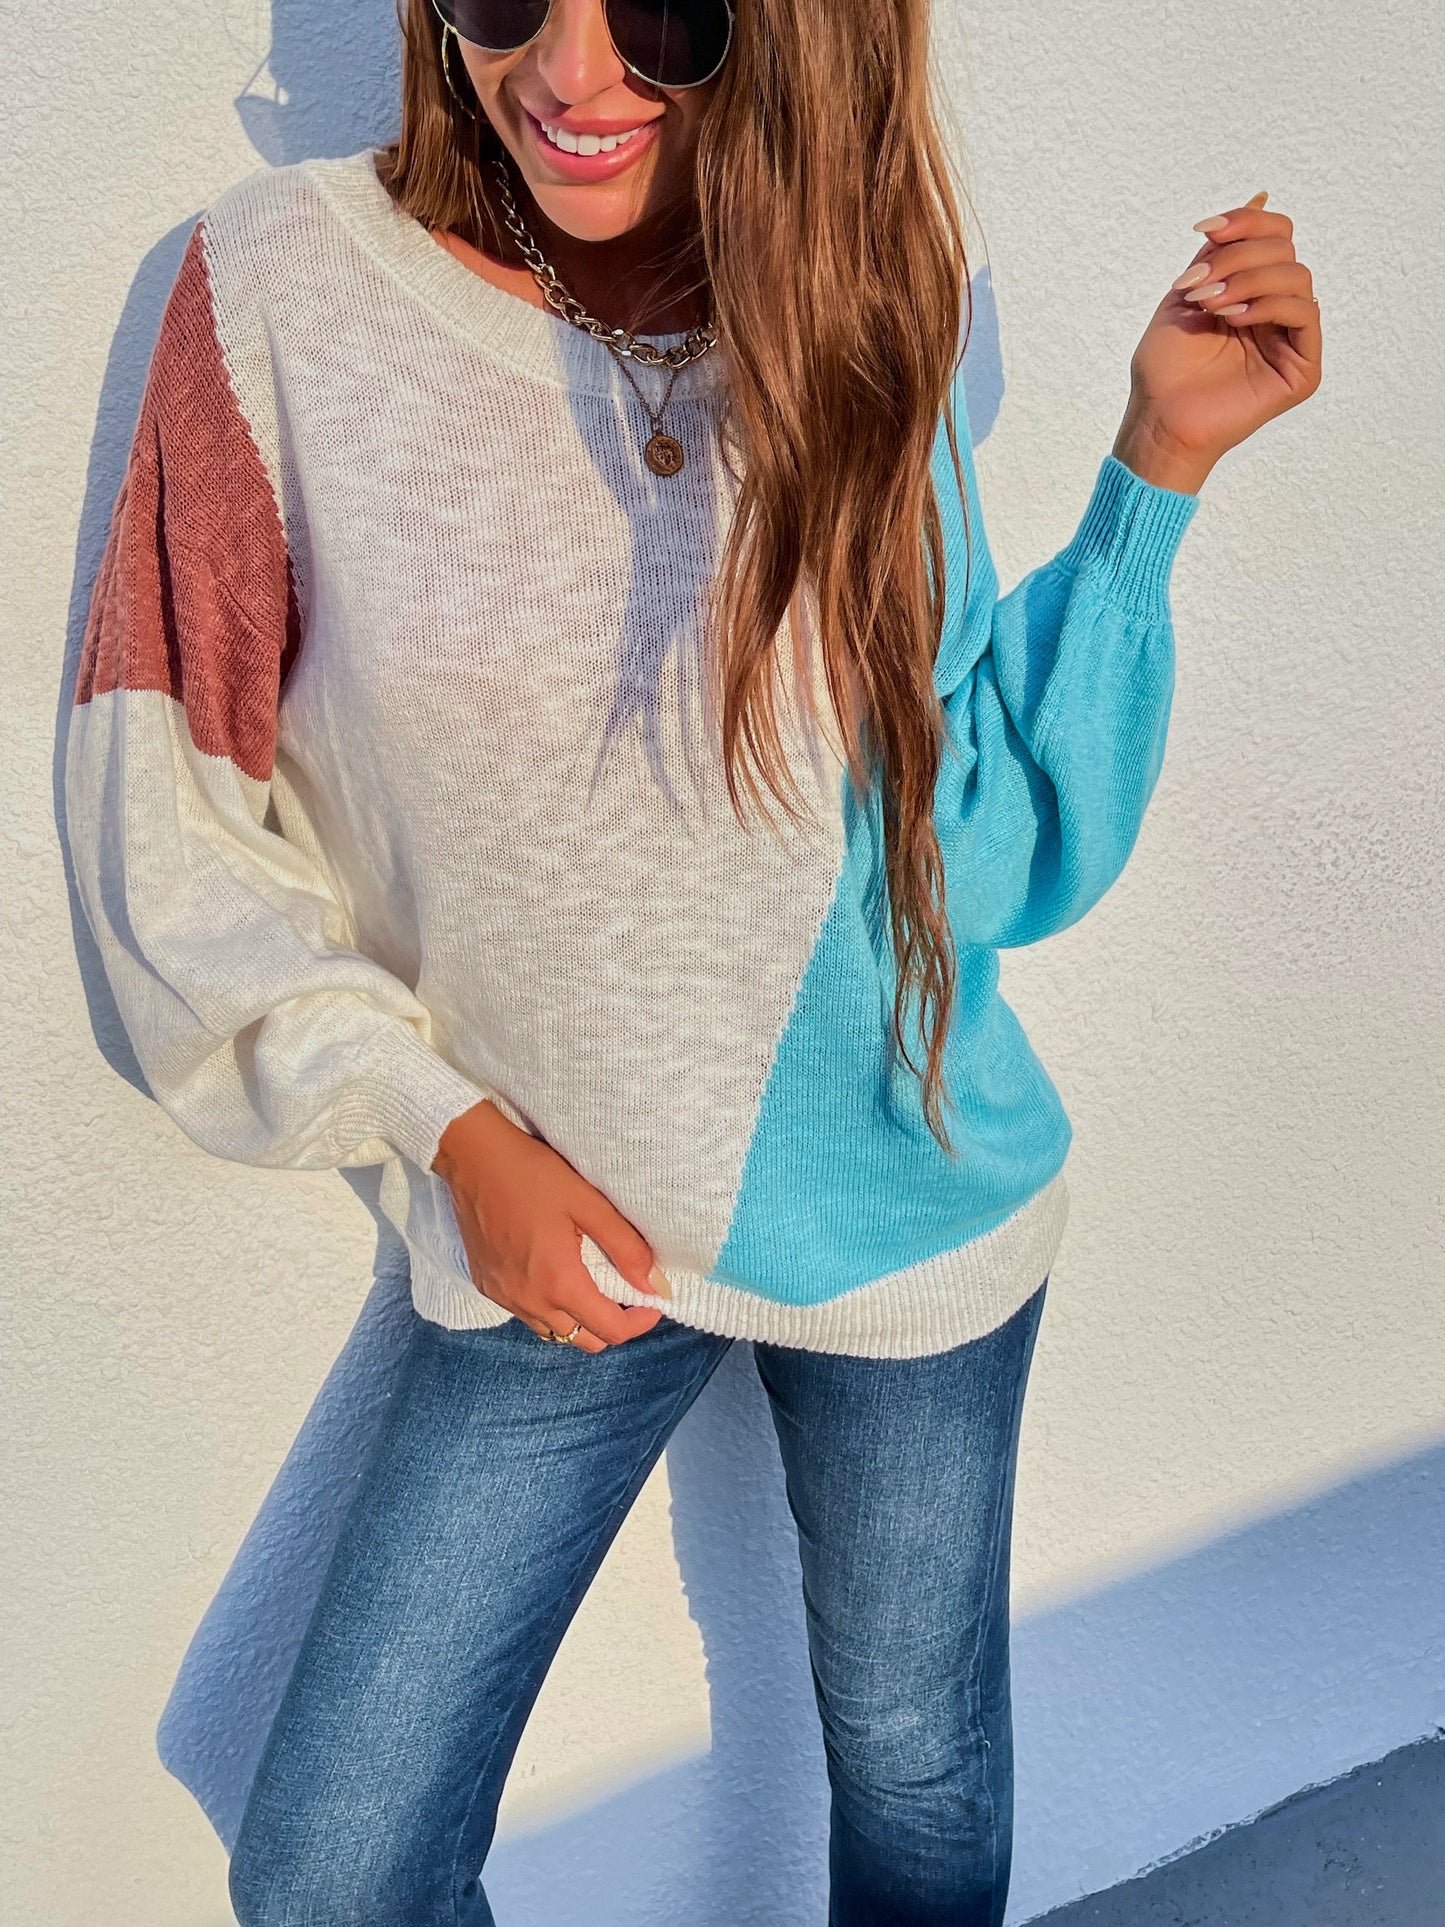 Casual Comfy Knit Sweater